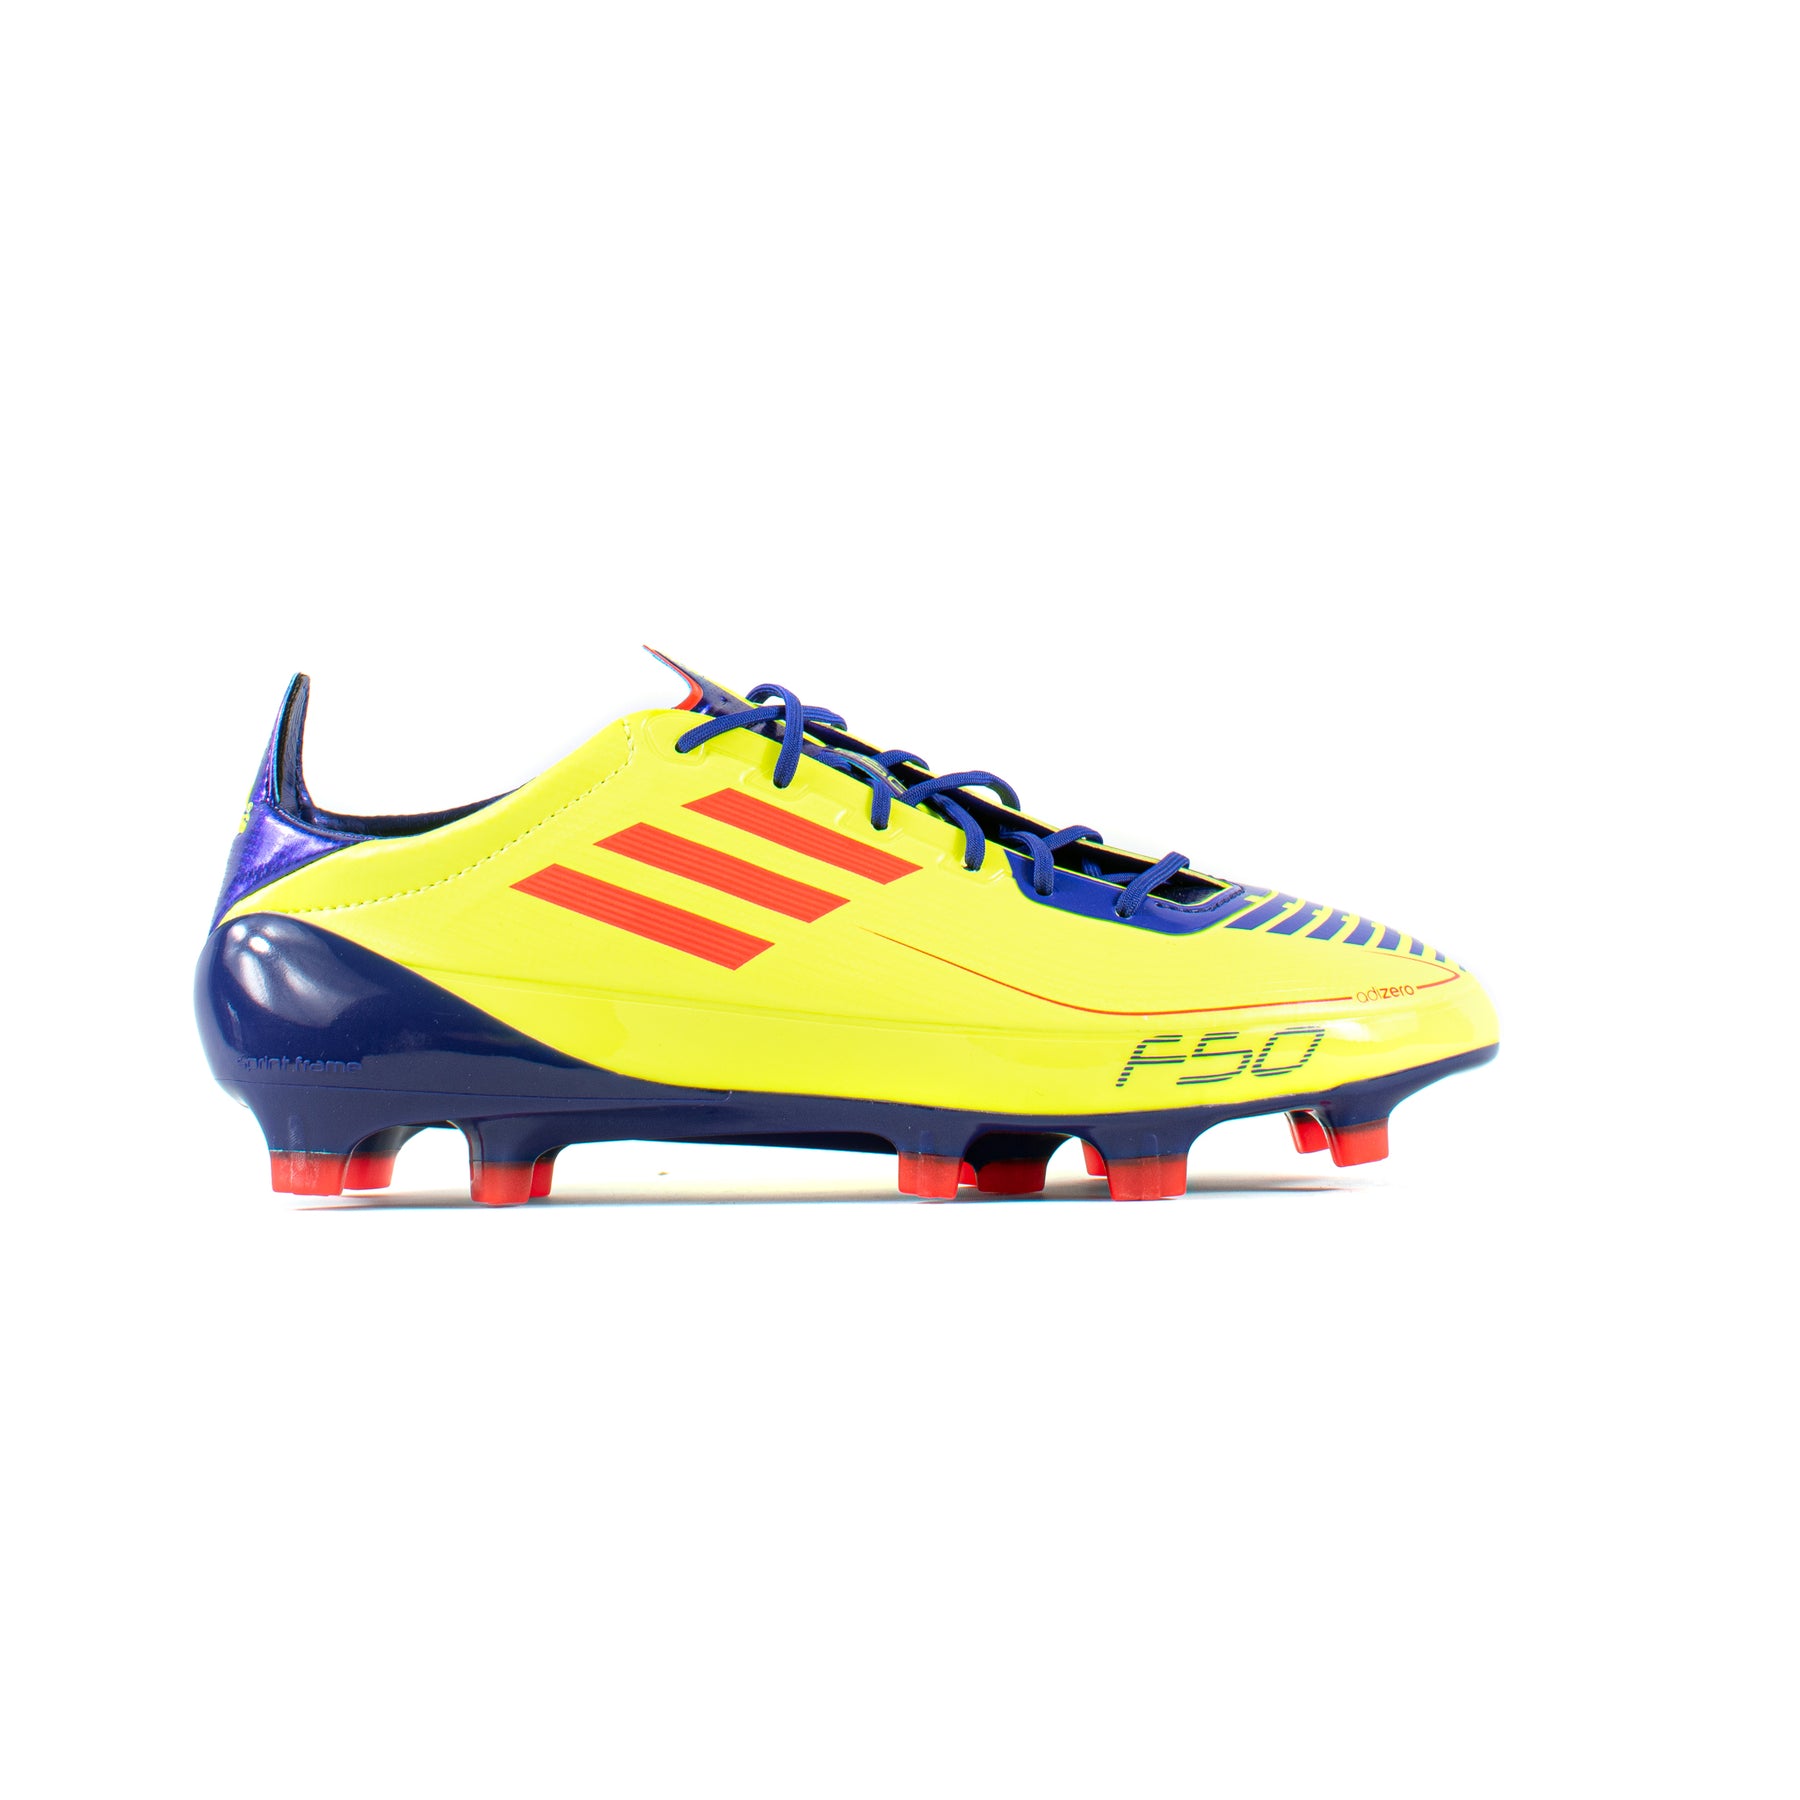 Adidas Electricity FG – Classic Soccer Cleats